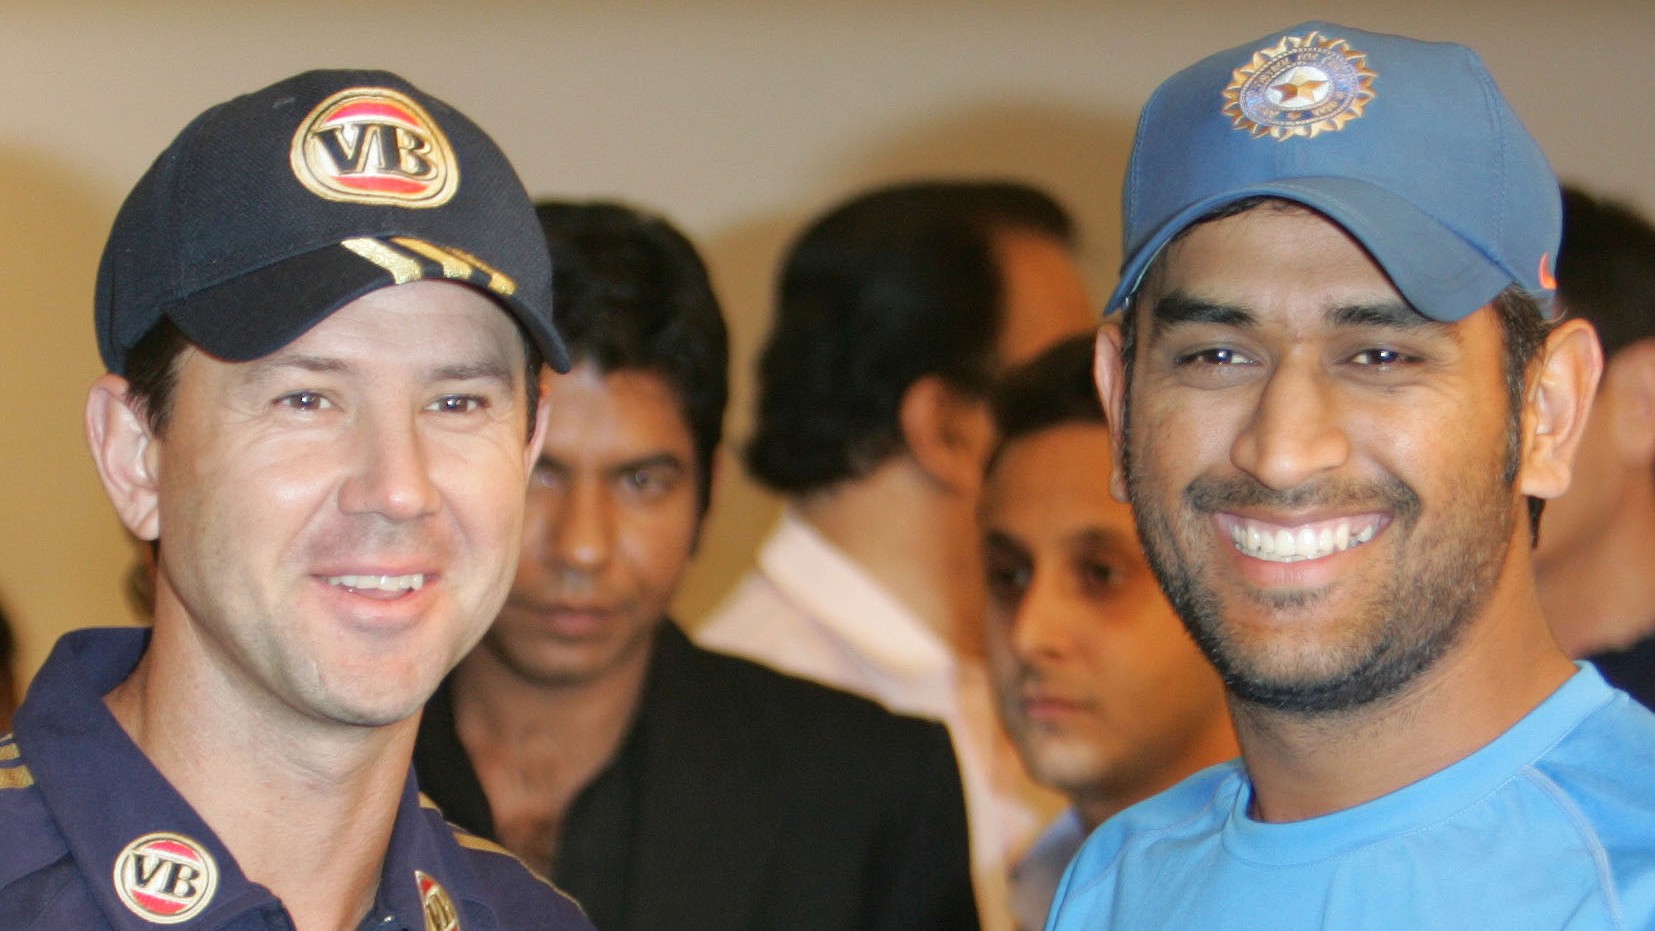 Ricky Ponting lauds MS Dhoni, says “still have to find ways to stop you against Delhi Capitals”